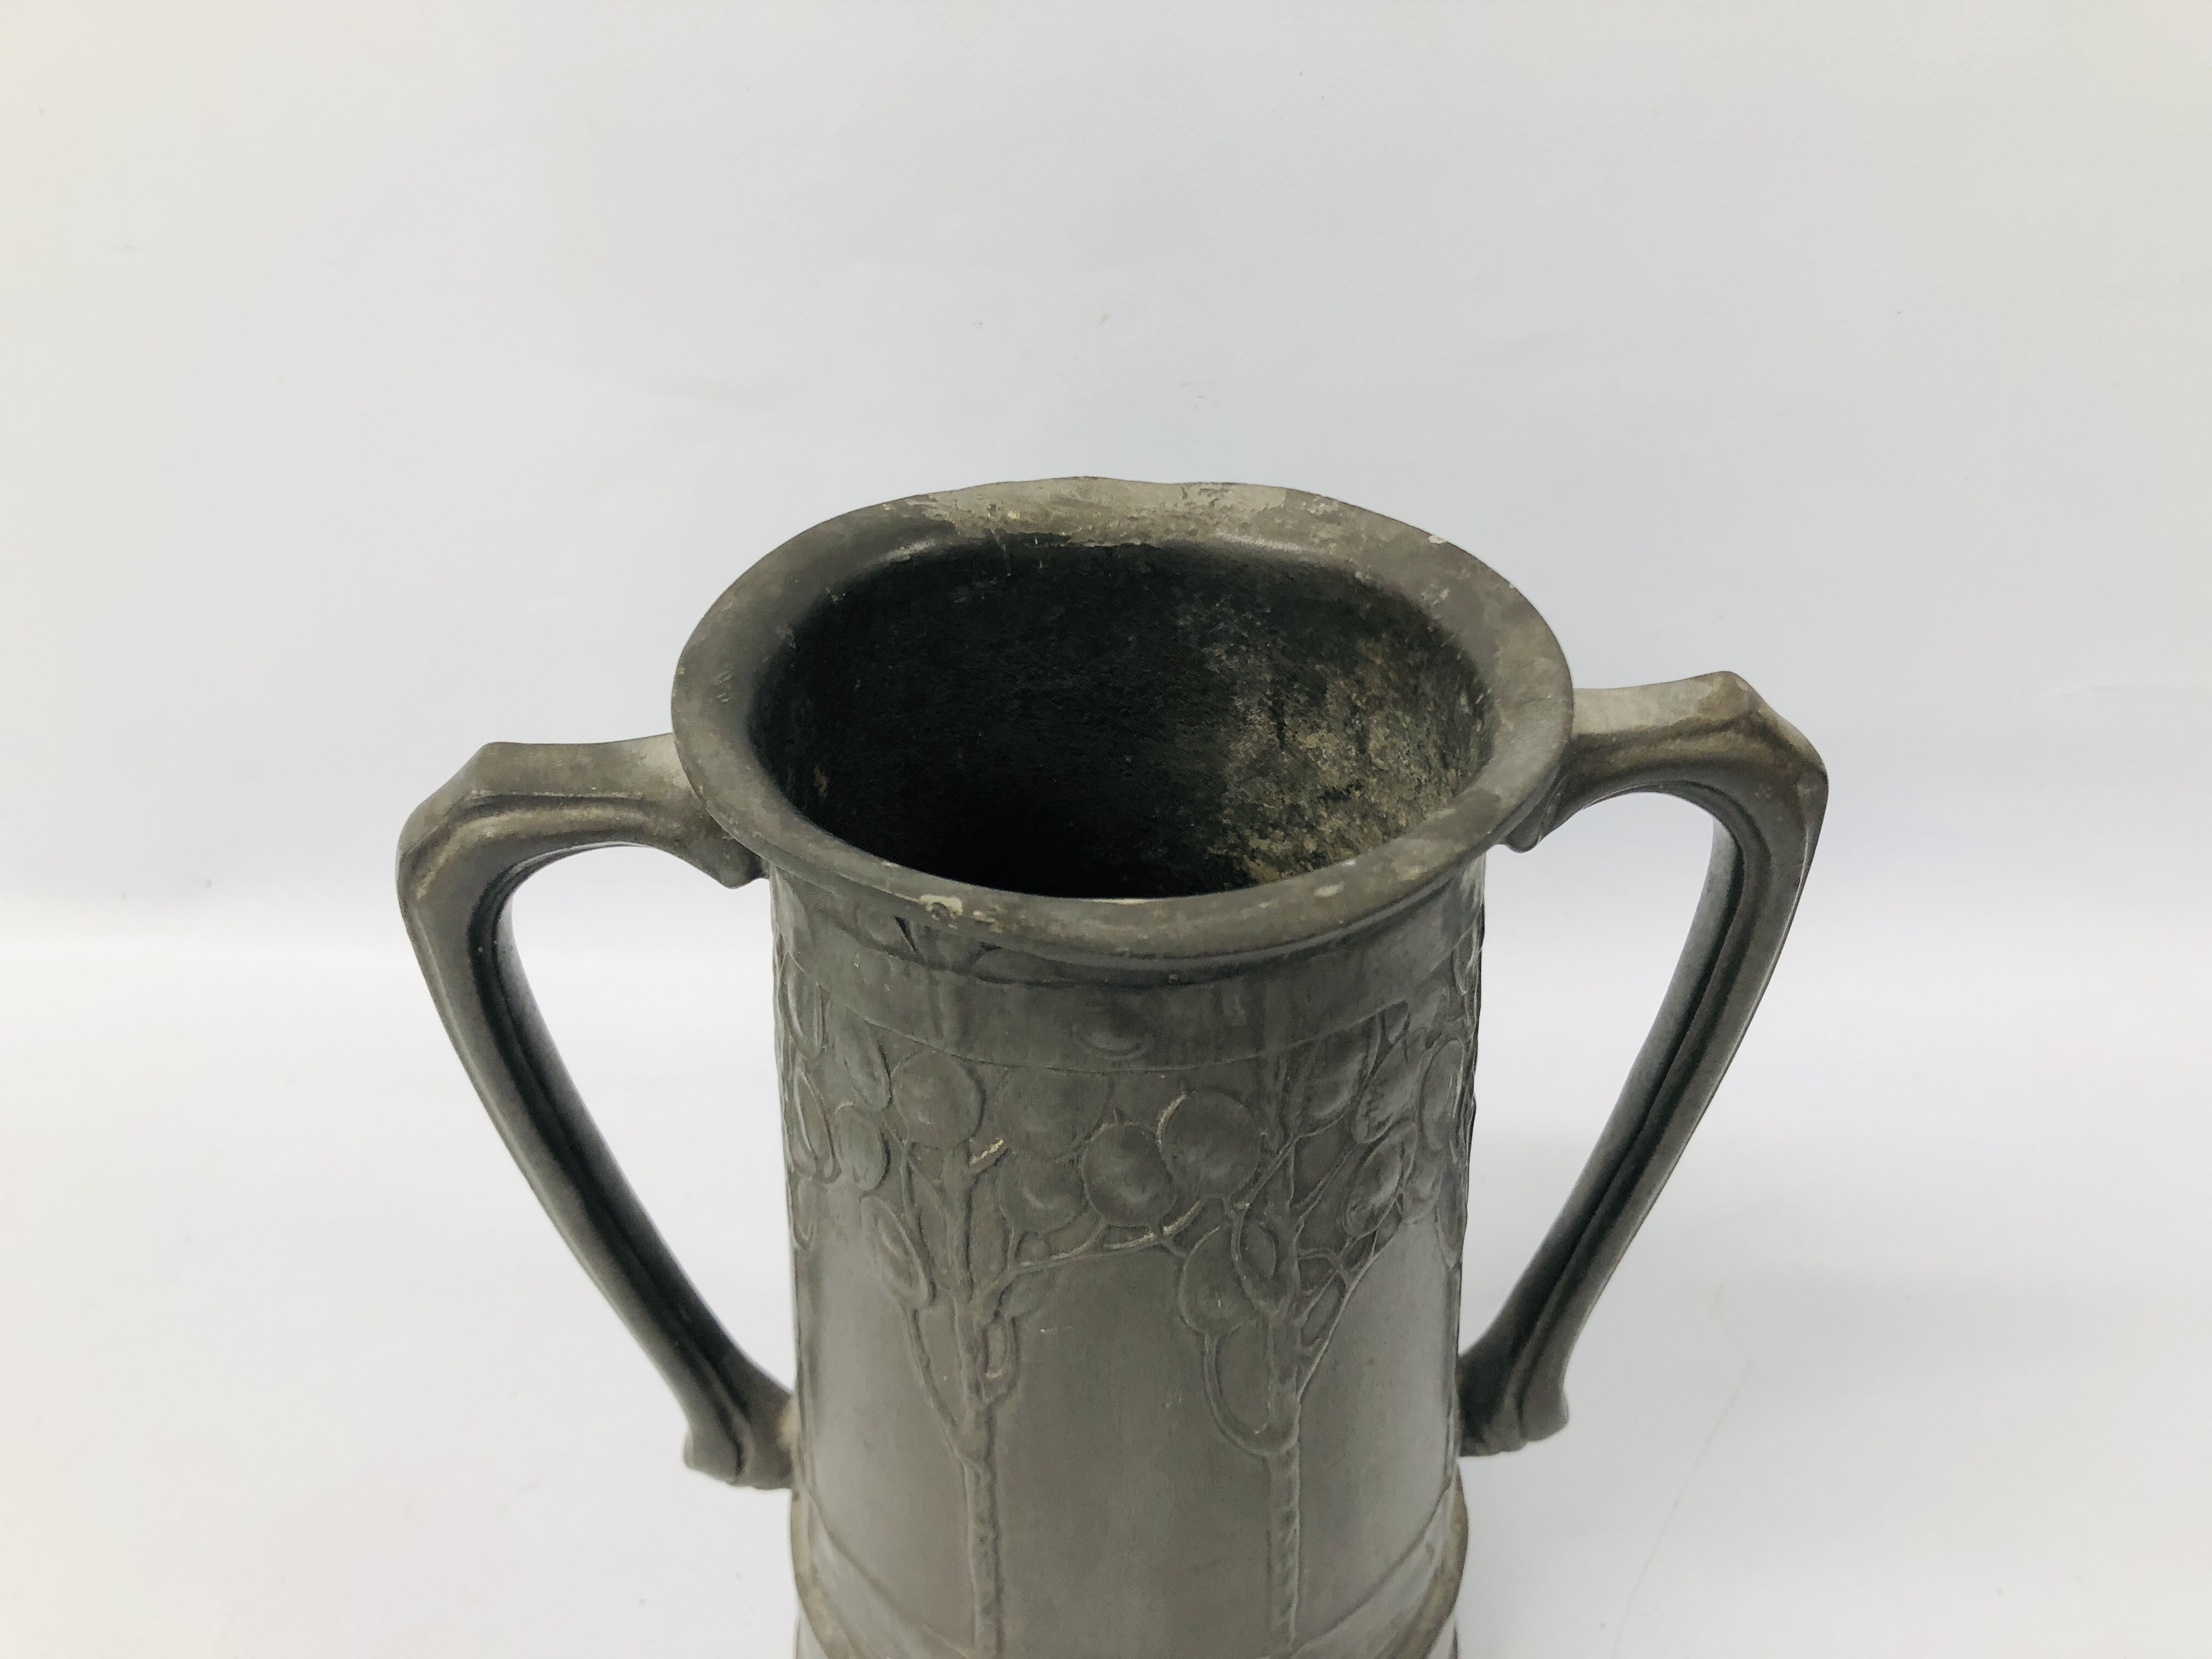 VINTAGE ARTS AND CRAFTS TUDRIC PEWTER TWO HANDLED TANKARD / VASE BEARING MAKERS MARK "LIBERTY & CO" - Image 8 of 10